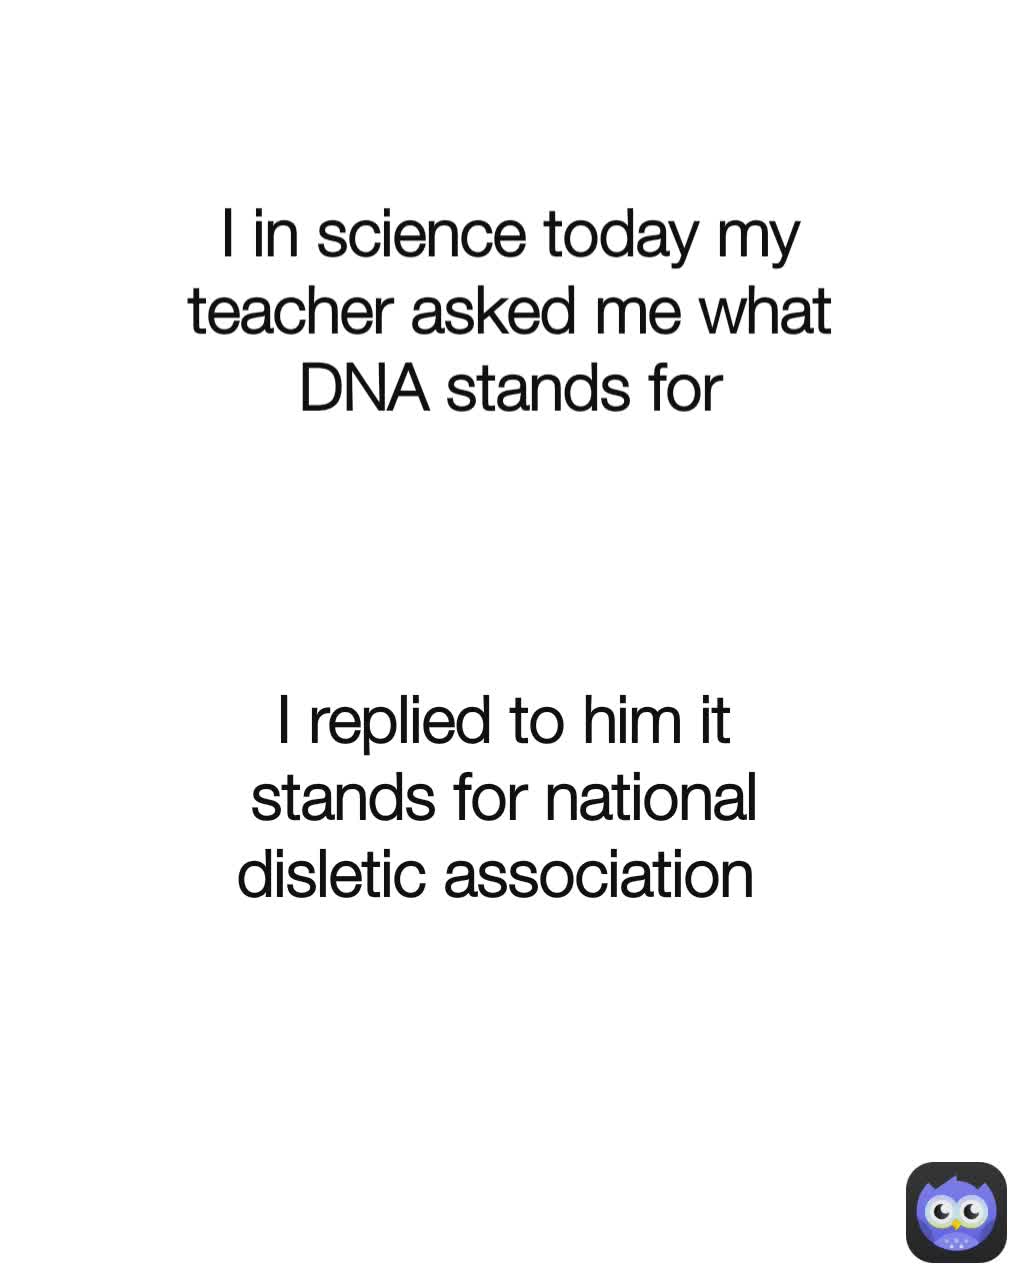 dna stands for wrong answer